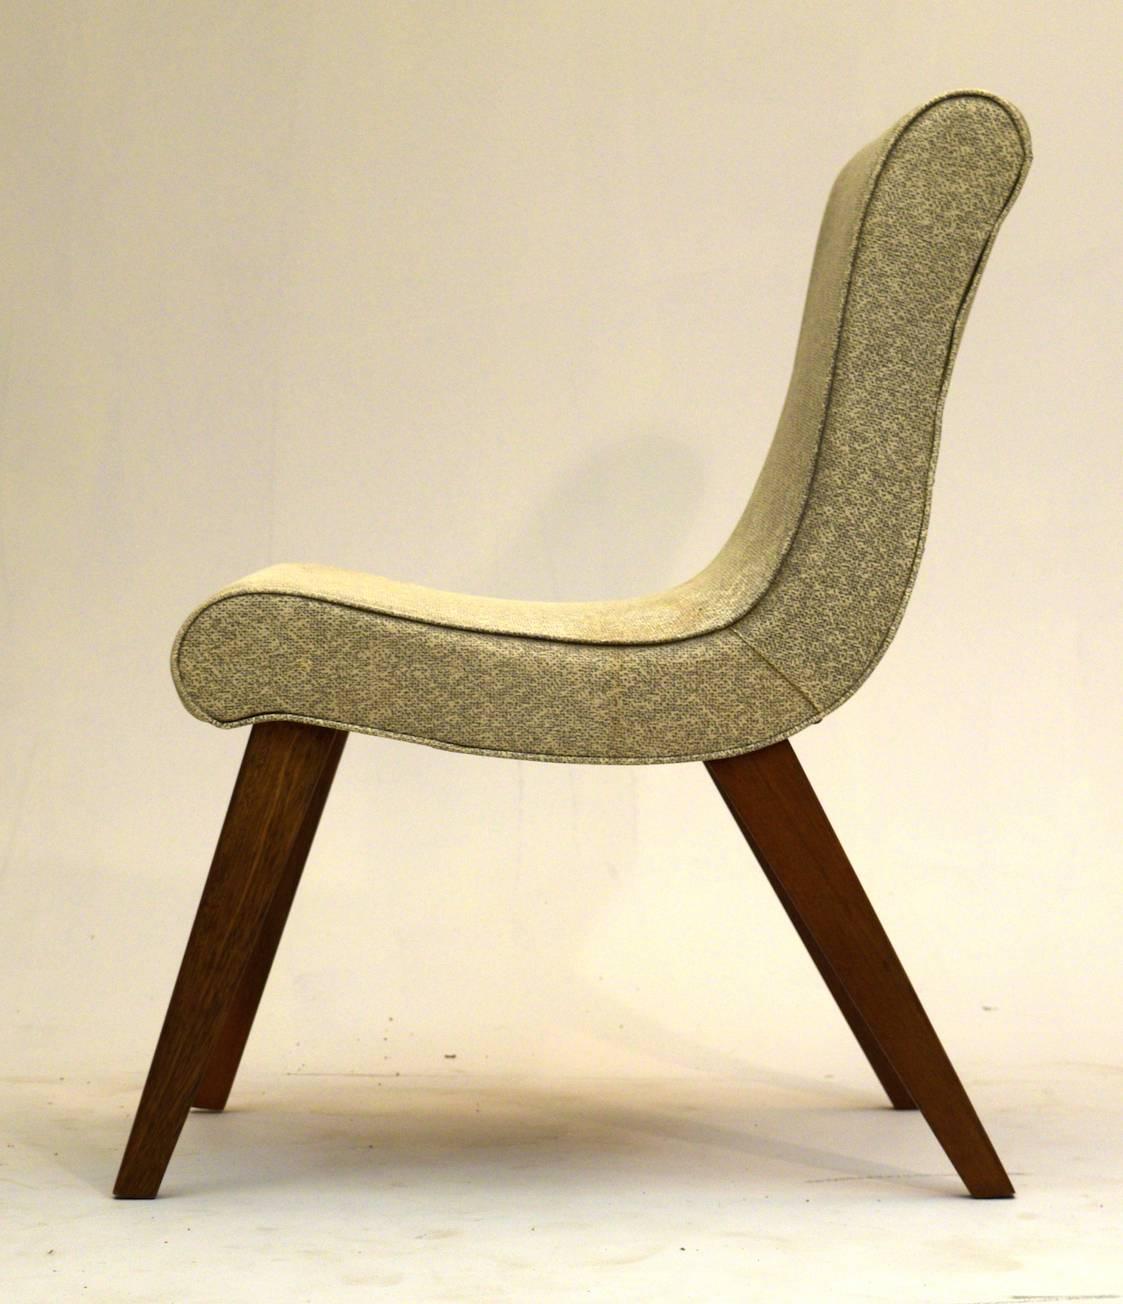 A very early chair that is attributed to Jens Risom for Knoll.

The chair features a vinyl type finish that is in good condition with a few marks and light staining. The legs have recently been re-enforced to the frame and can not be